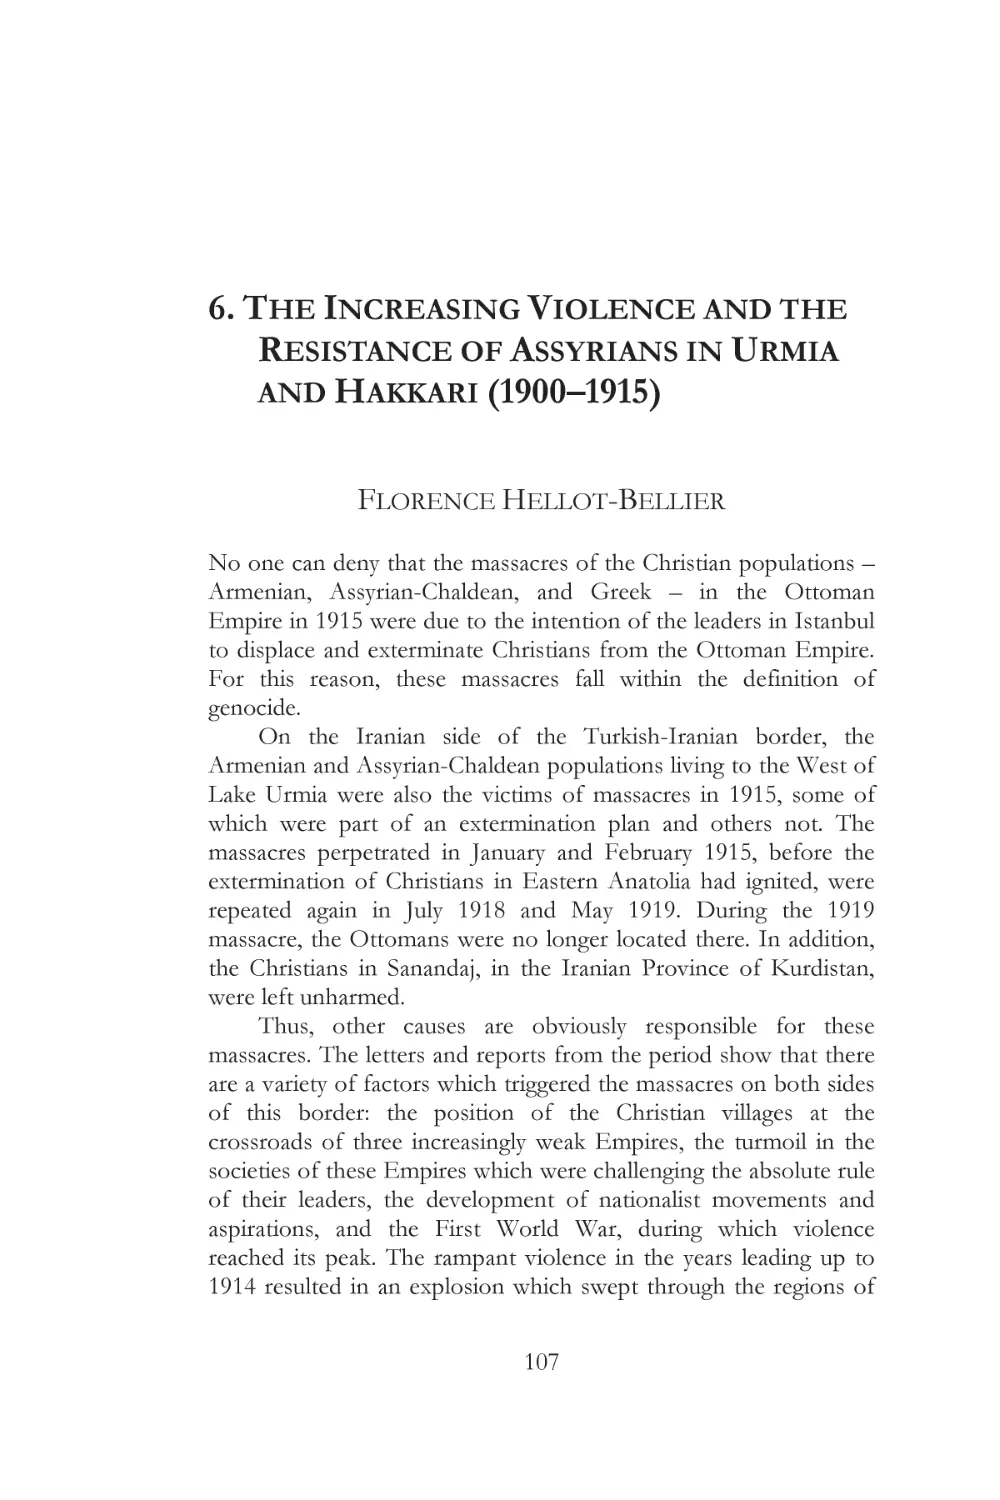 II. LOCAL STUDIES
6. THE INCREASING VIOLENCE AND THE RESISTANCE OF ASSYRIANS IN URMIA AND HAKKARI (1900–1915)